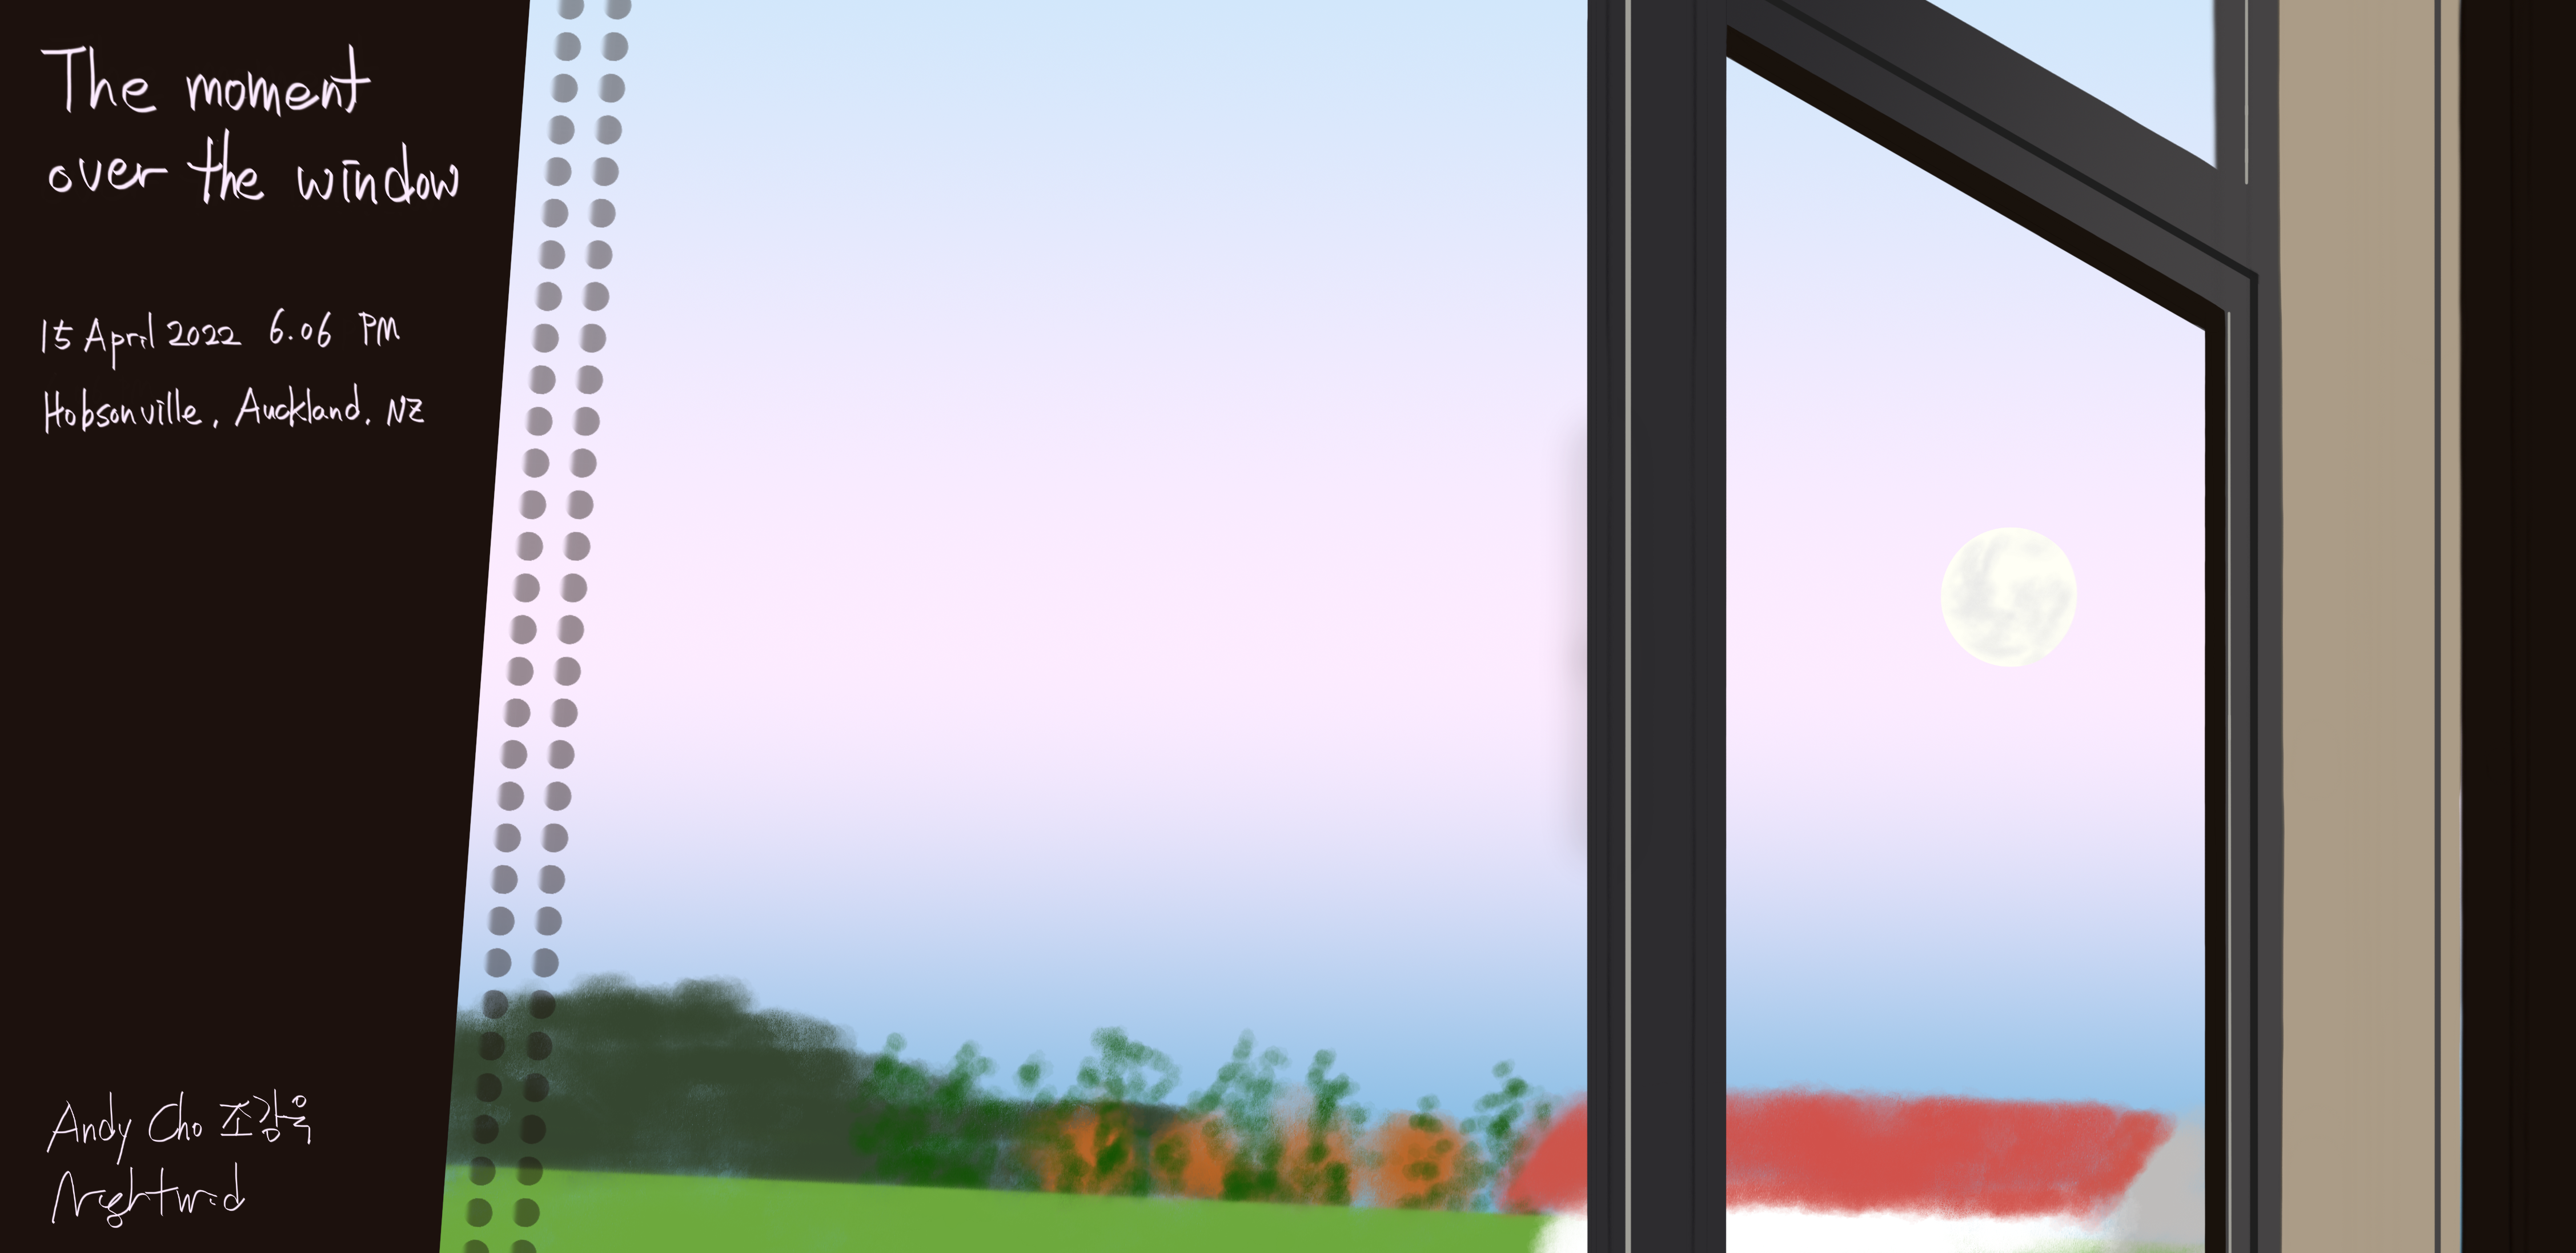 The moment over the window 15 April 2022.png